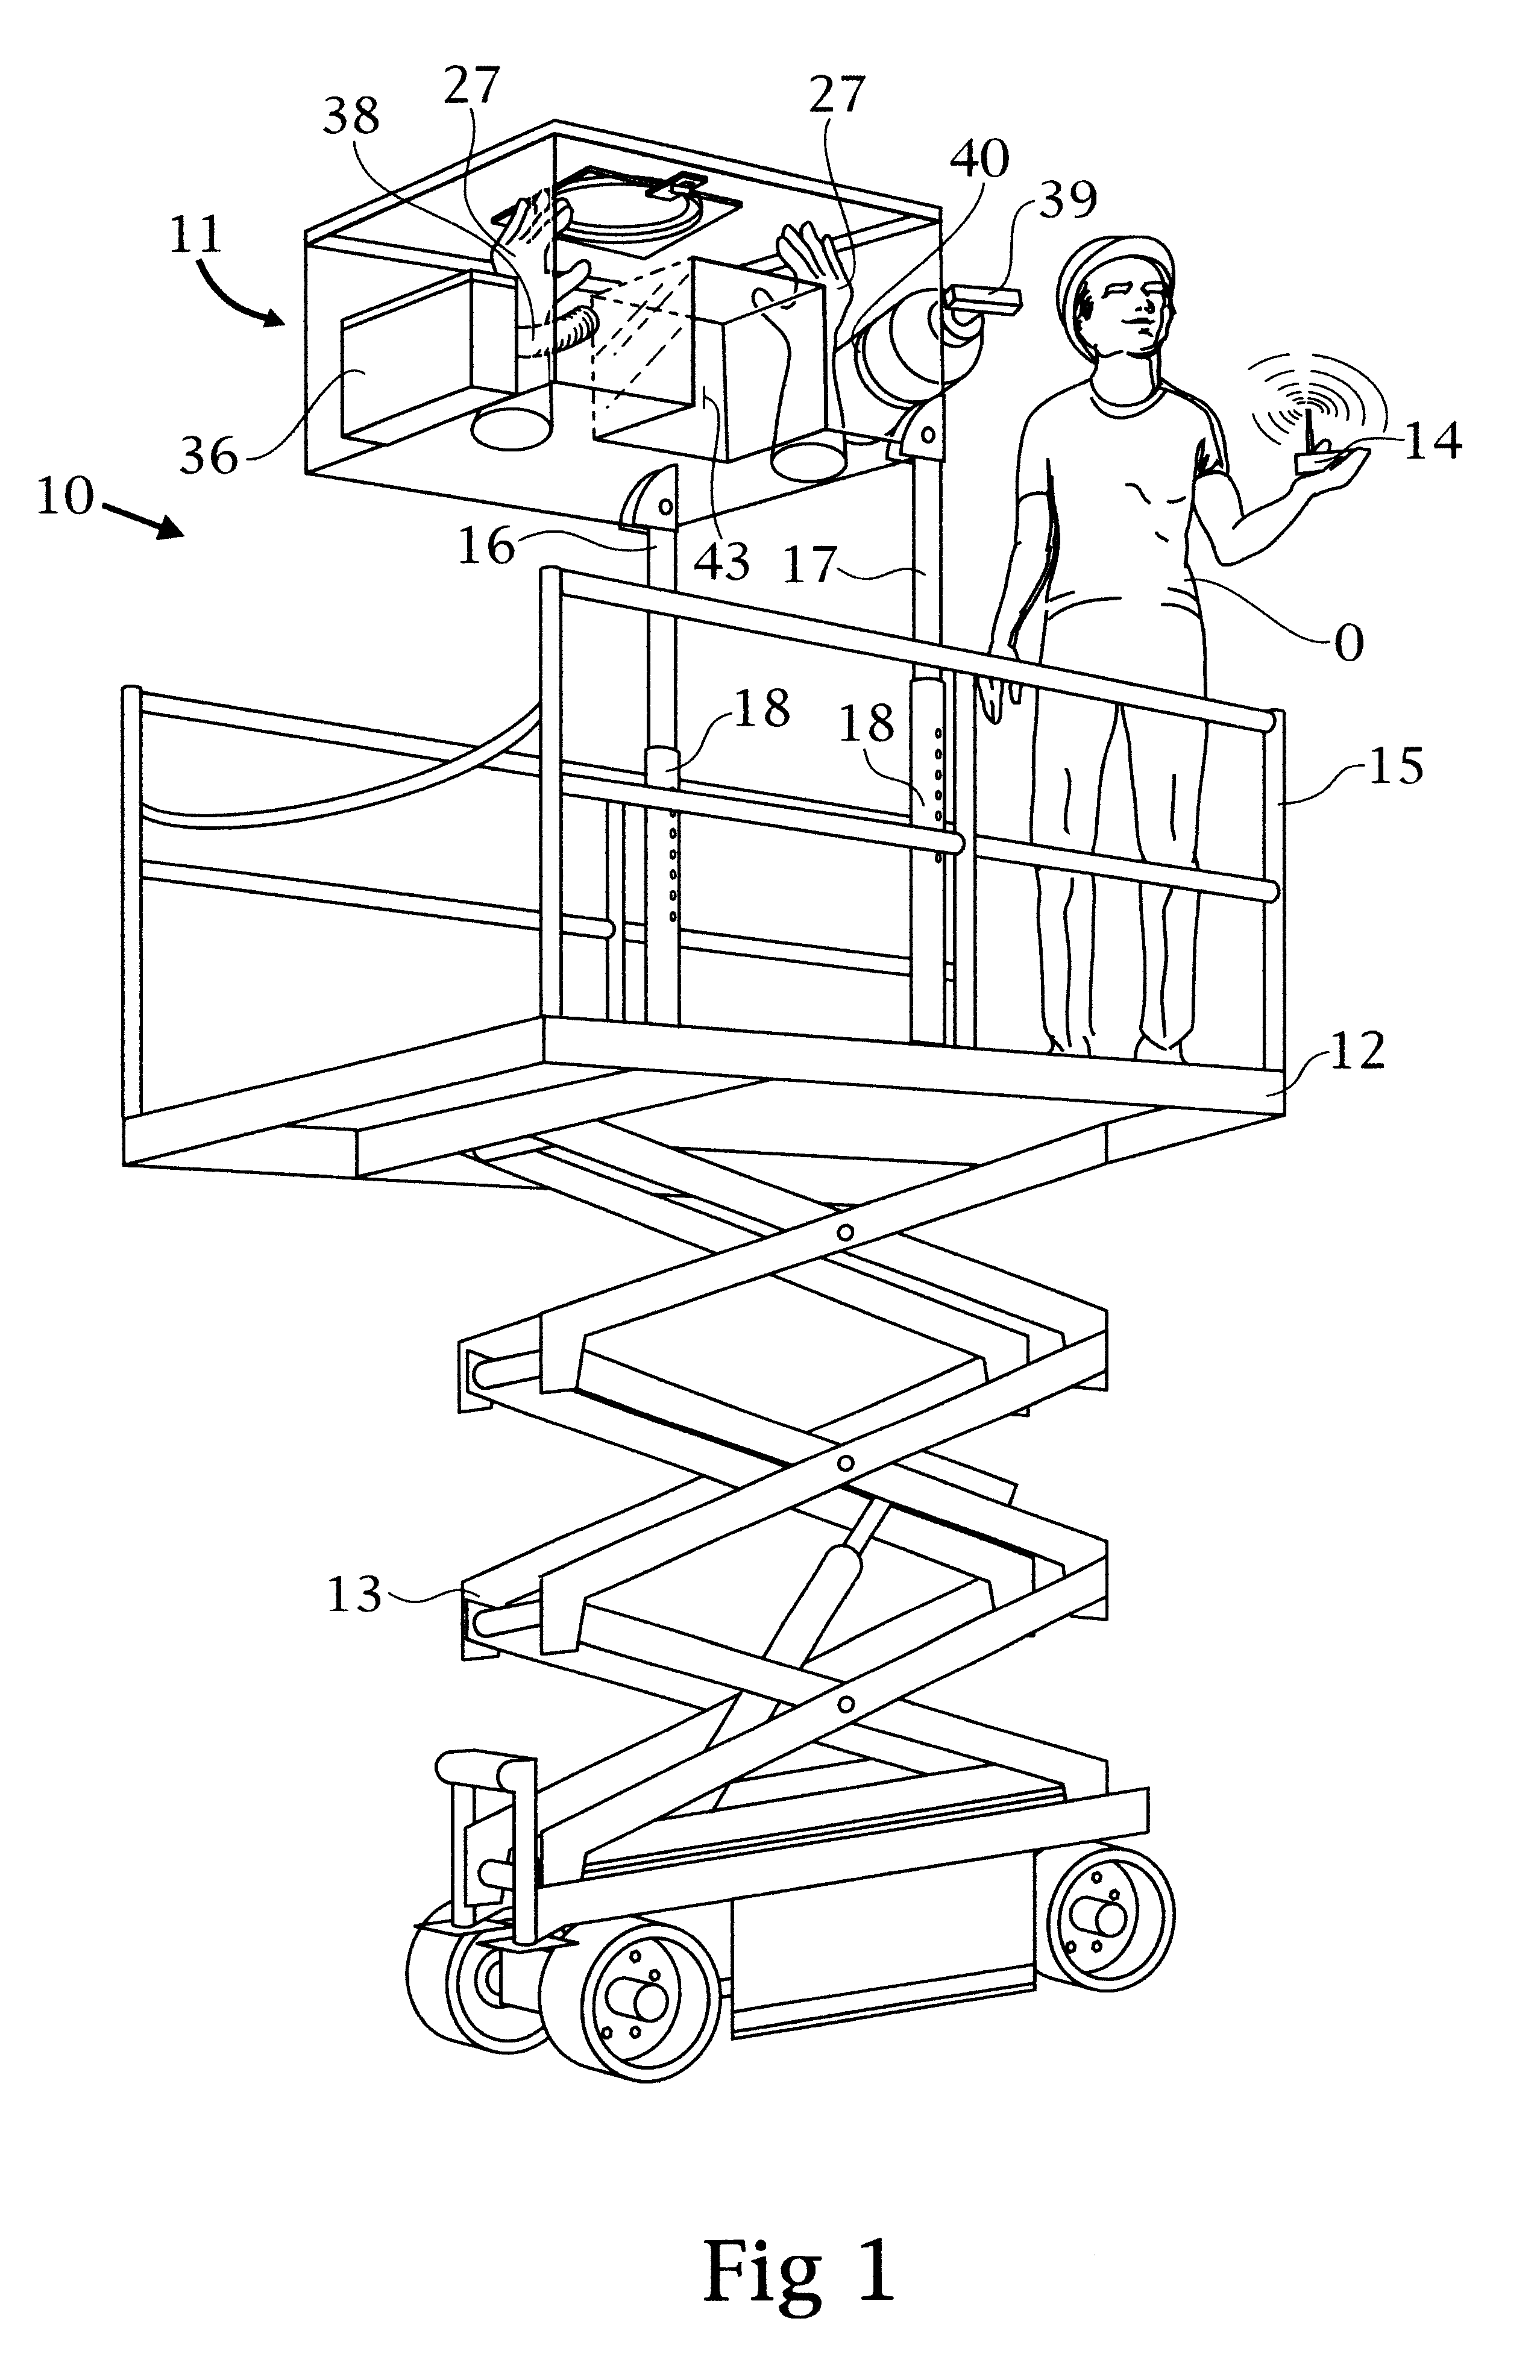 Pollution containment apparatus for making a penetration in a ceiling or wall of a building or other structure